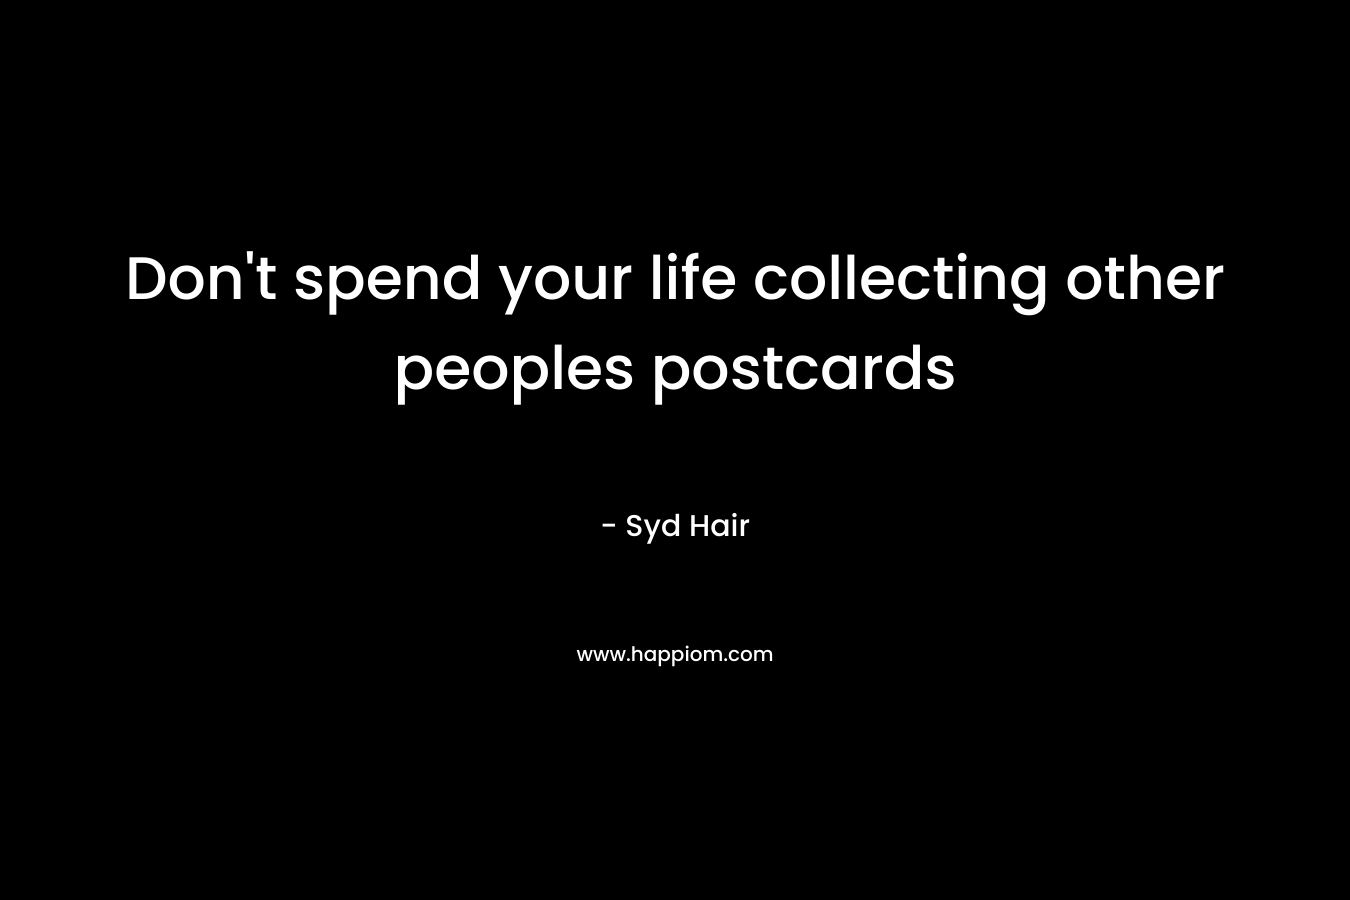 Don't spend your life collecting other peoples postcards